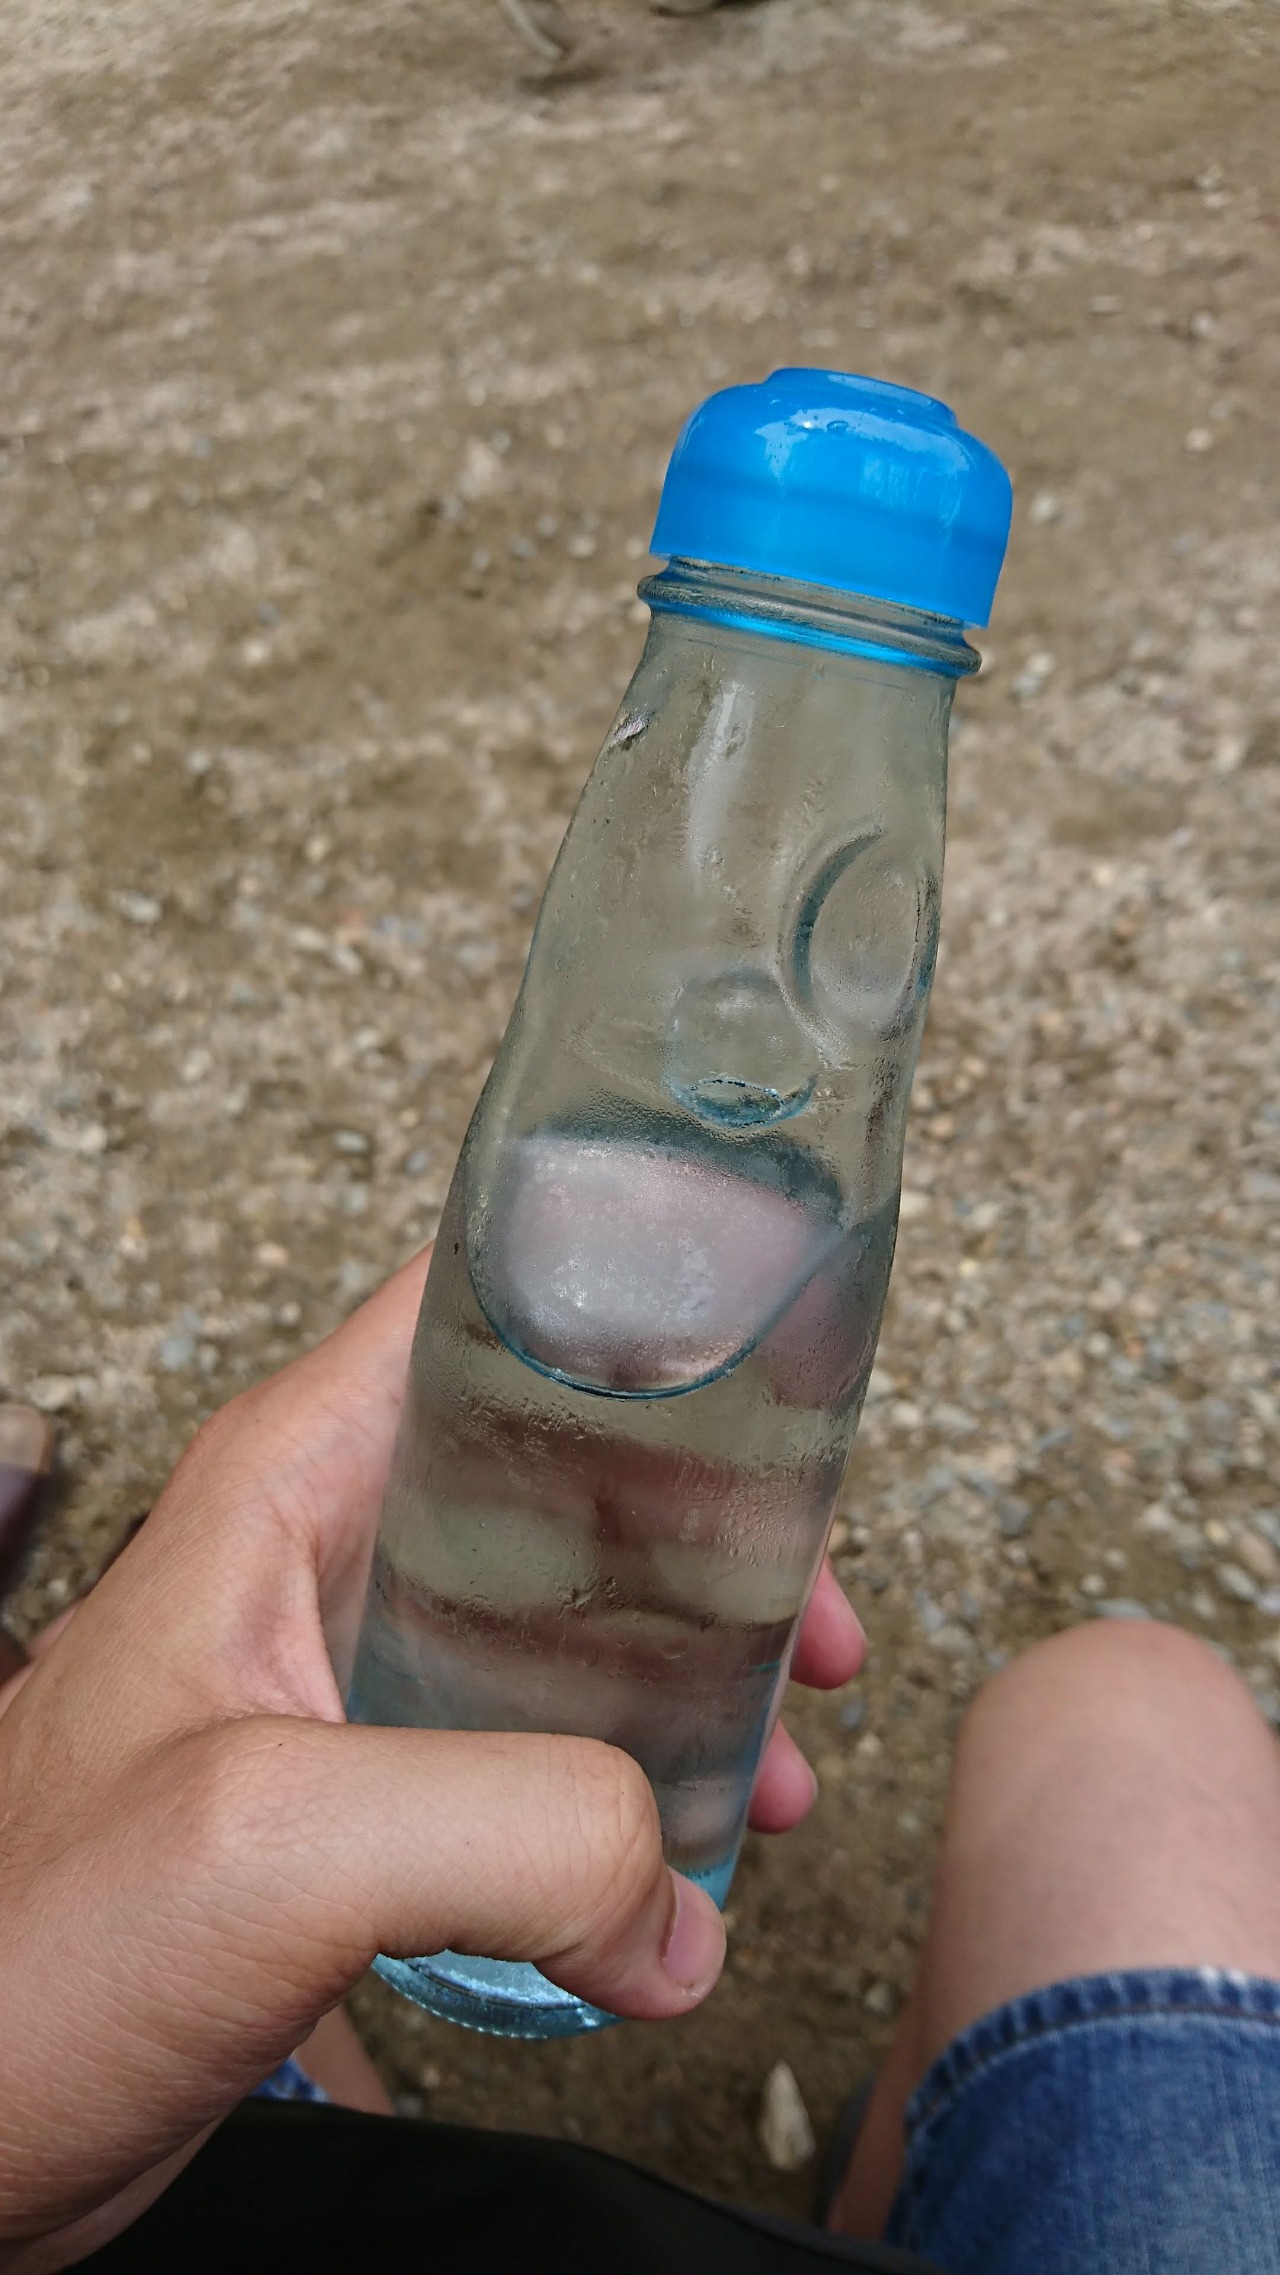 Holding Ramune (a lemon-lime flaboured carbonated soft drink in Japan) bottle in my hand.